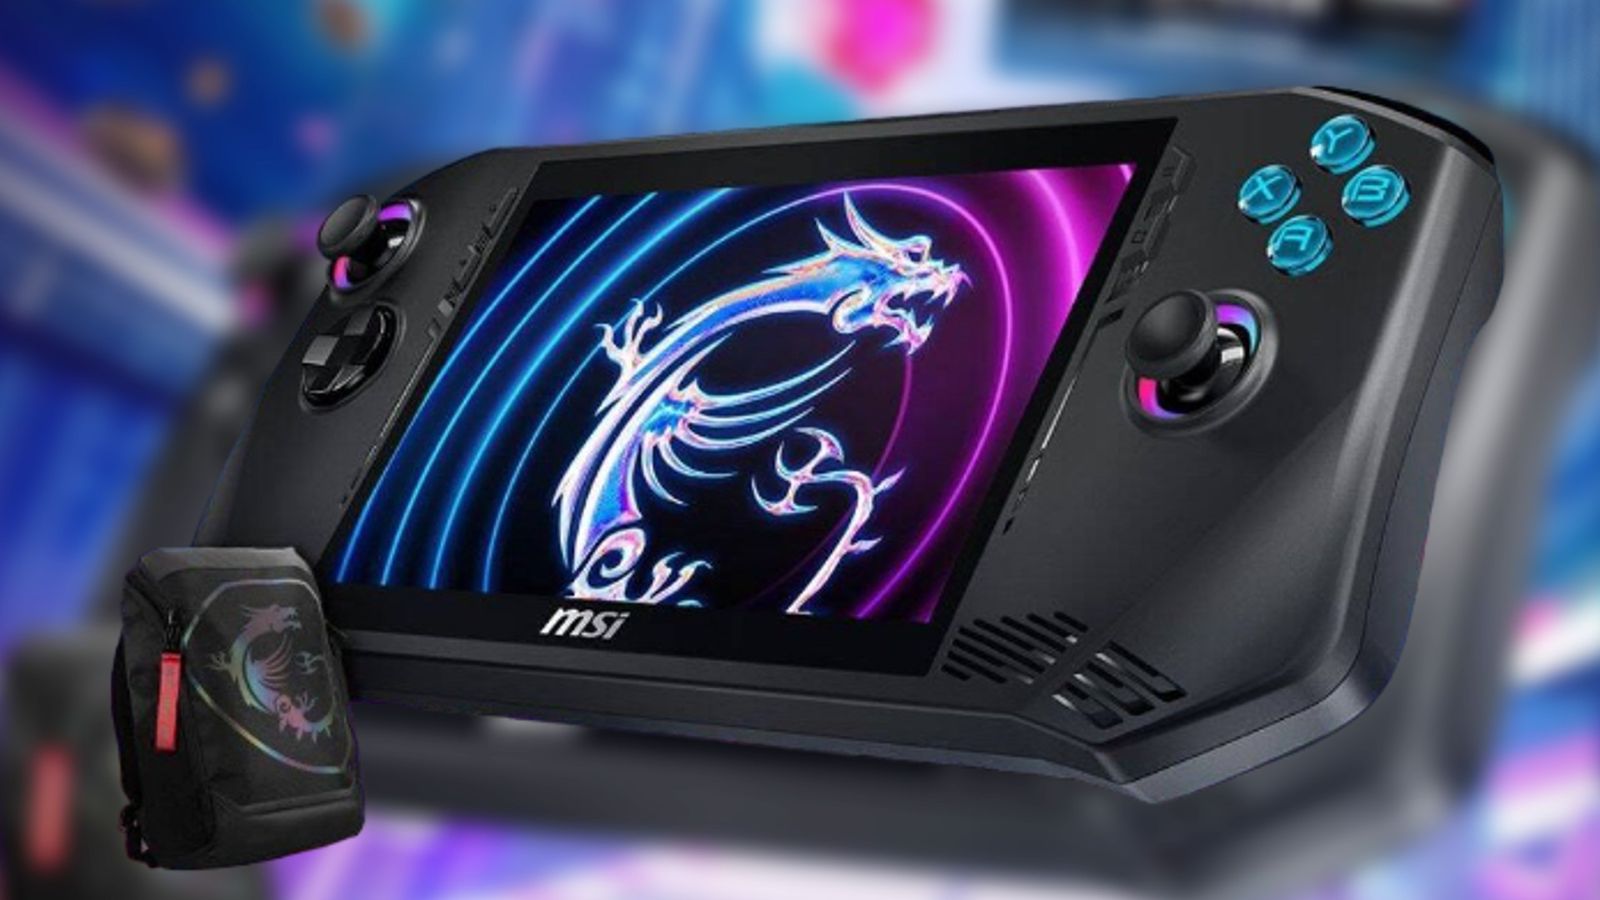 MSI Claw handheld leaked image in front of a blurred background